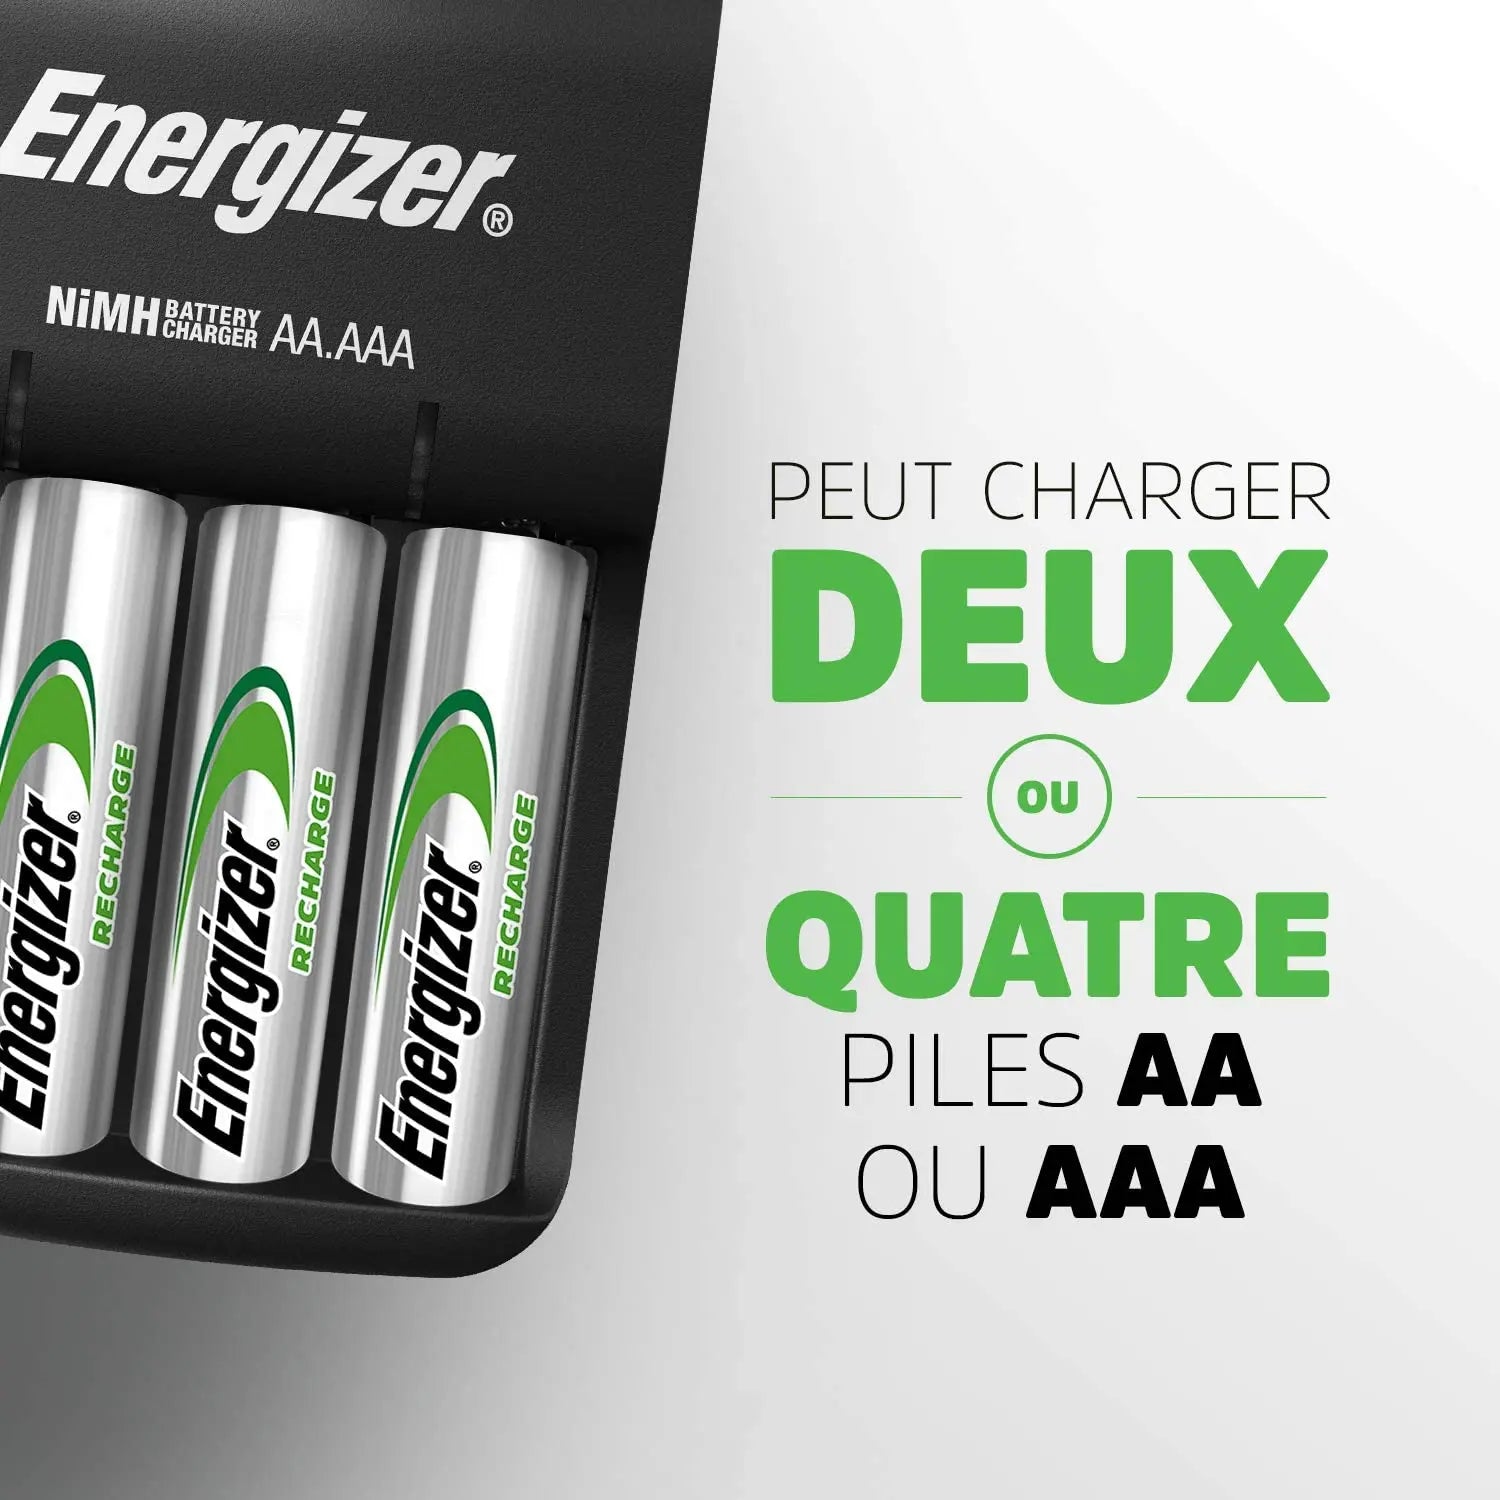 Energizer Chargeur Piles Rechargeables AA et AAA, Recharge Base (4 Piles AA  incluses)